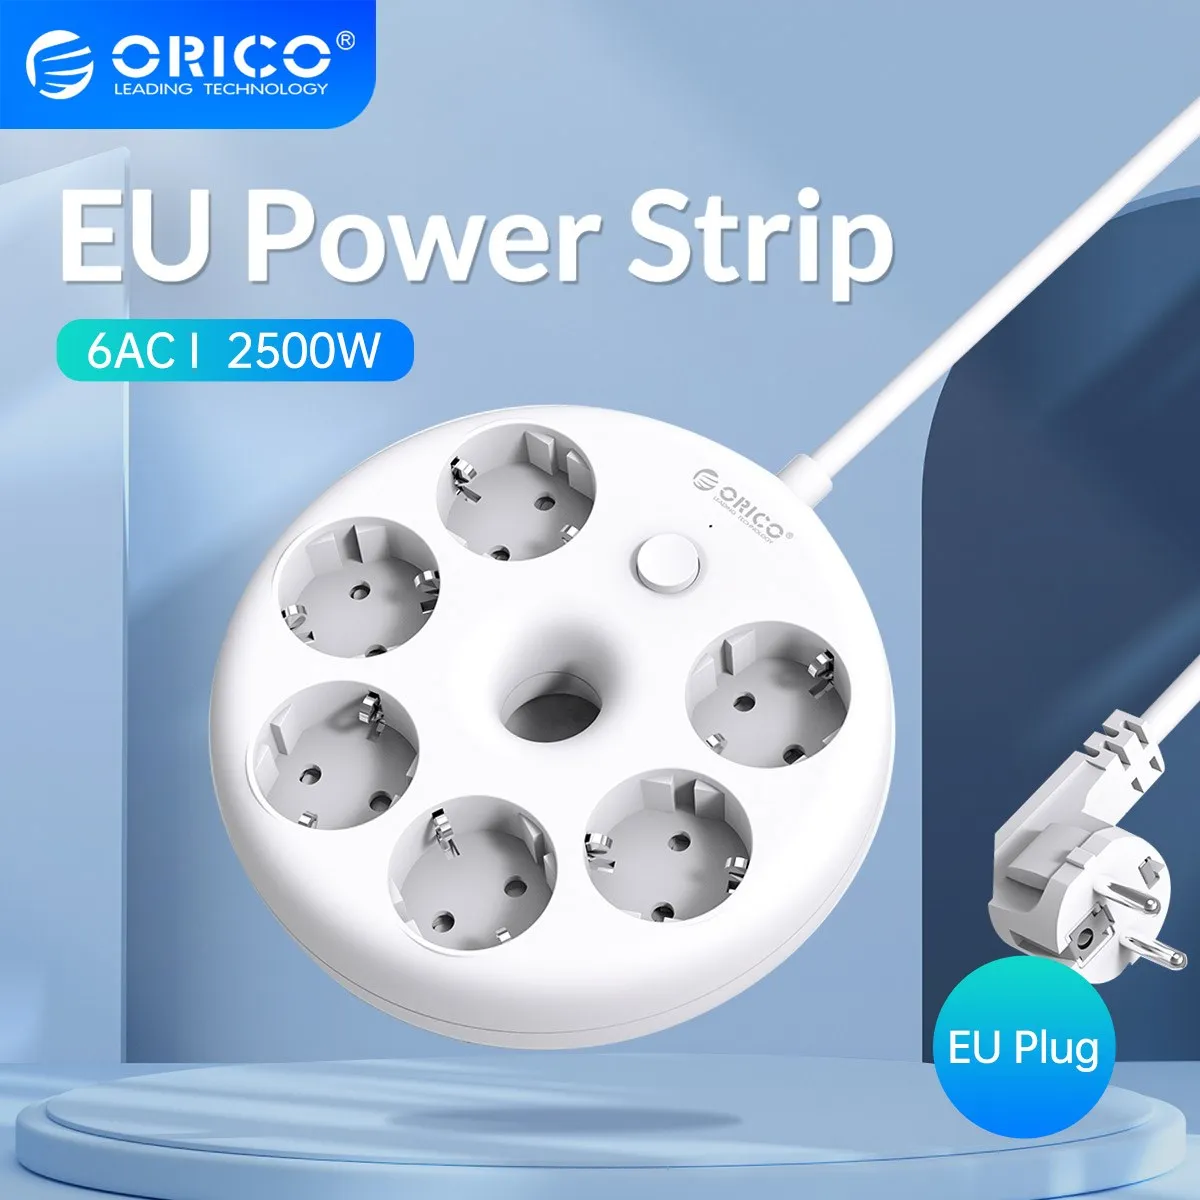 

ORICO Power Strip EU Plug 6AC Outlets Electrical Multiple Socket With 1.5M Extension Cable For Office Home Overload Protection